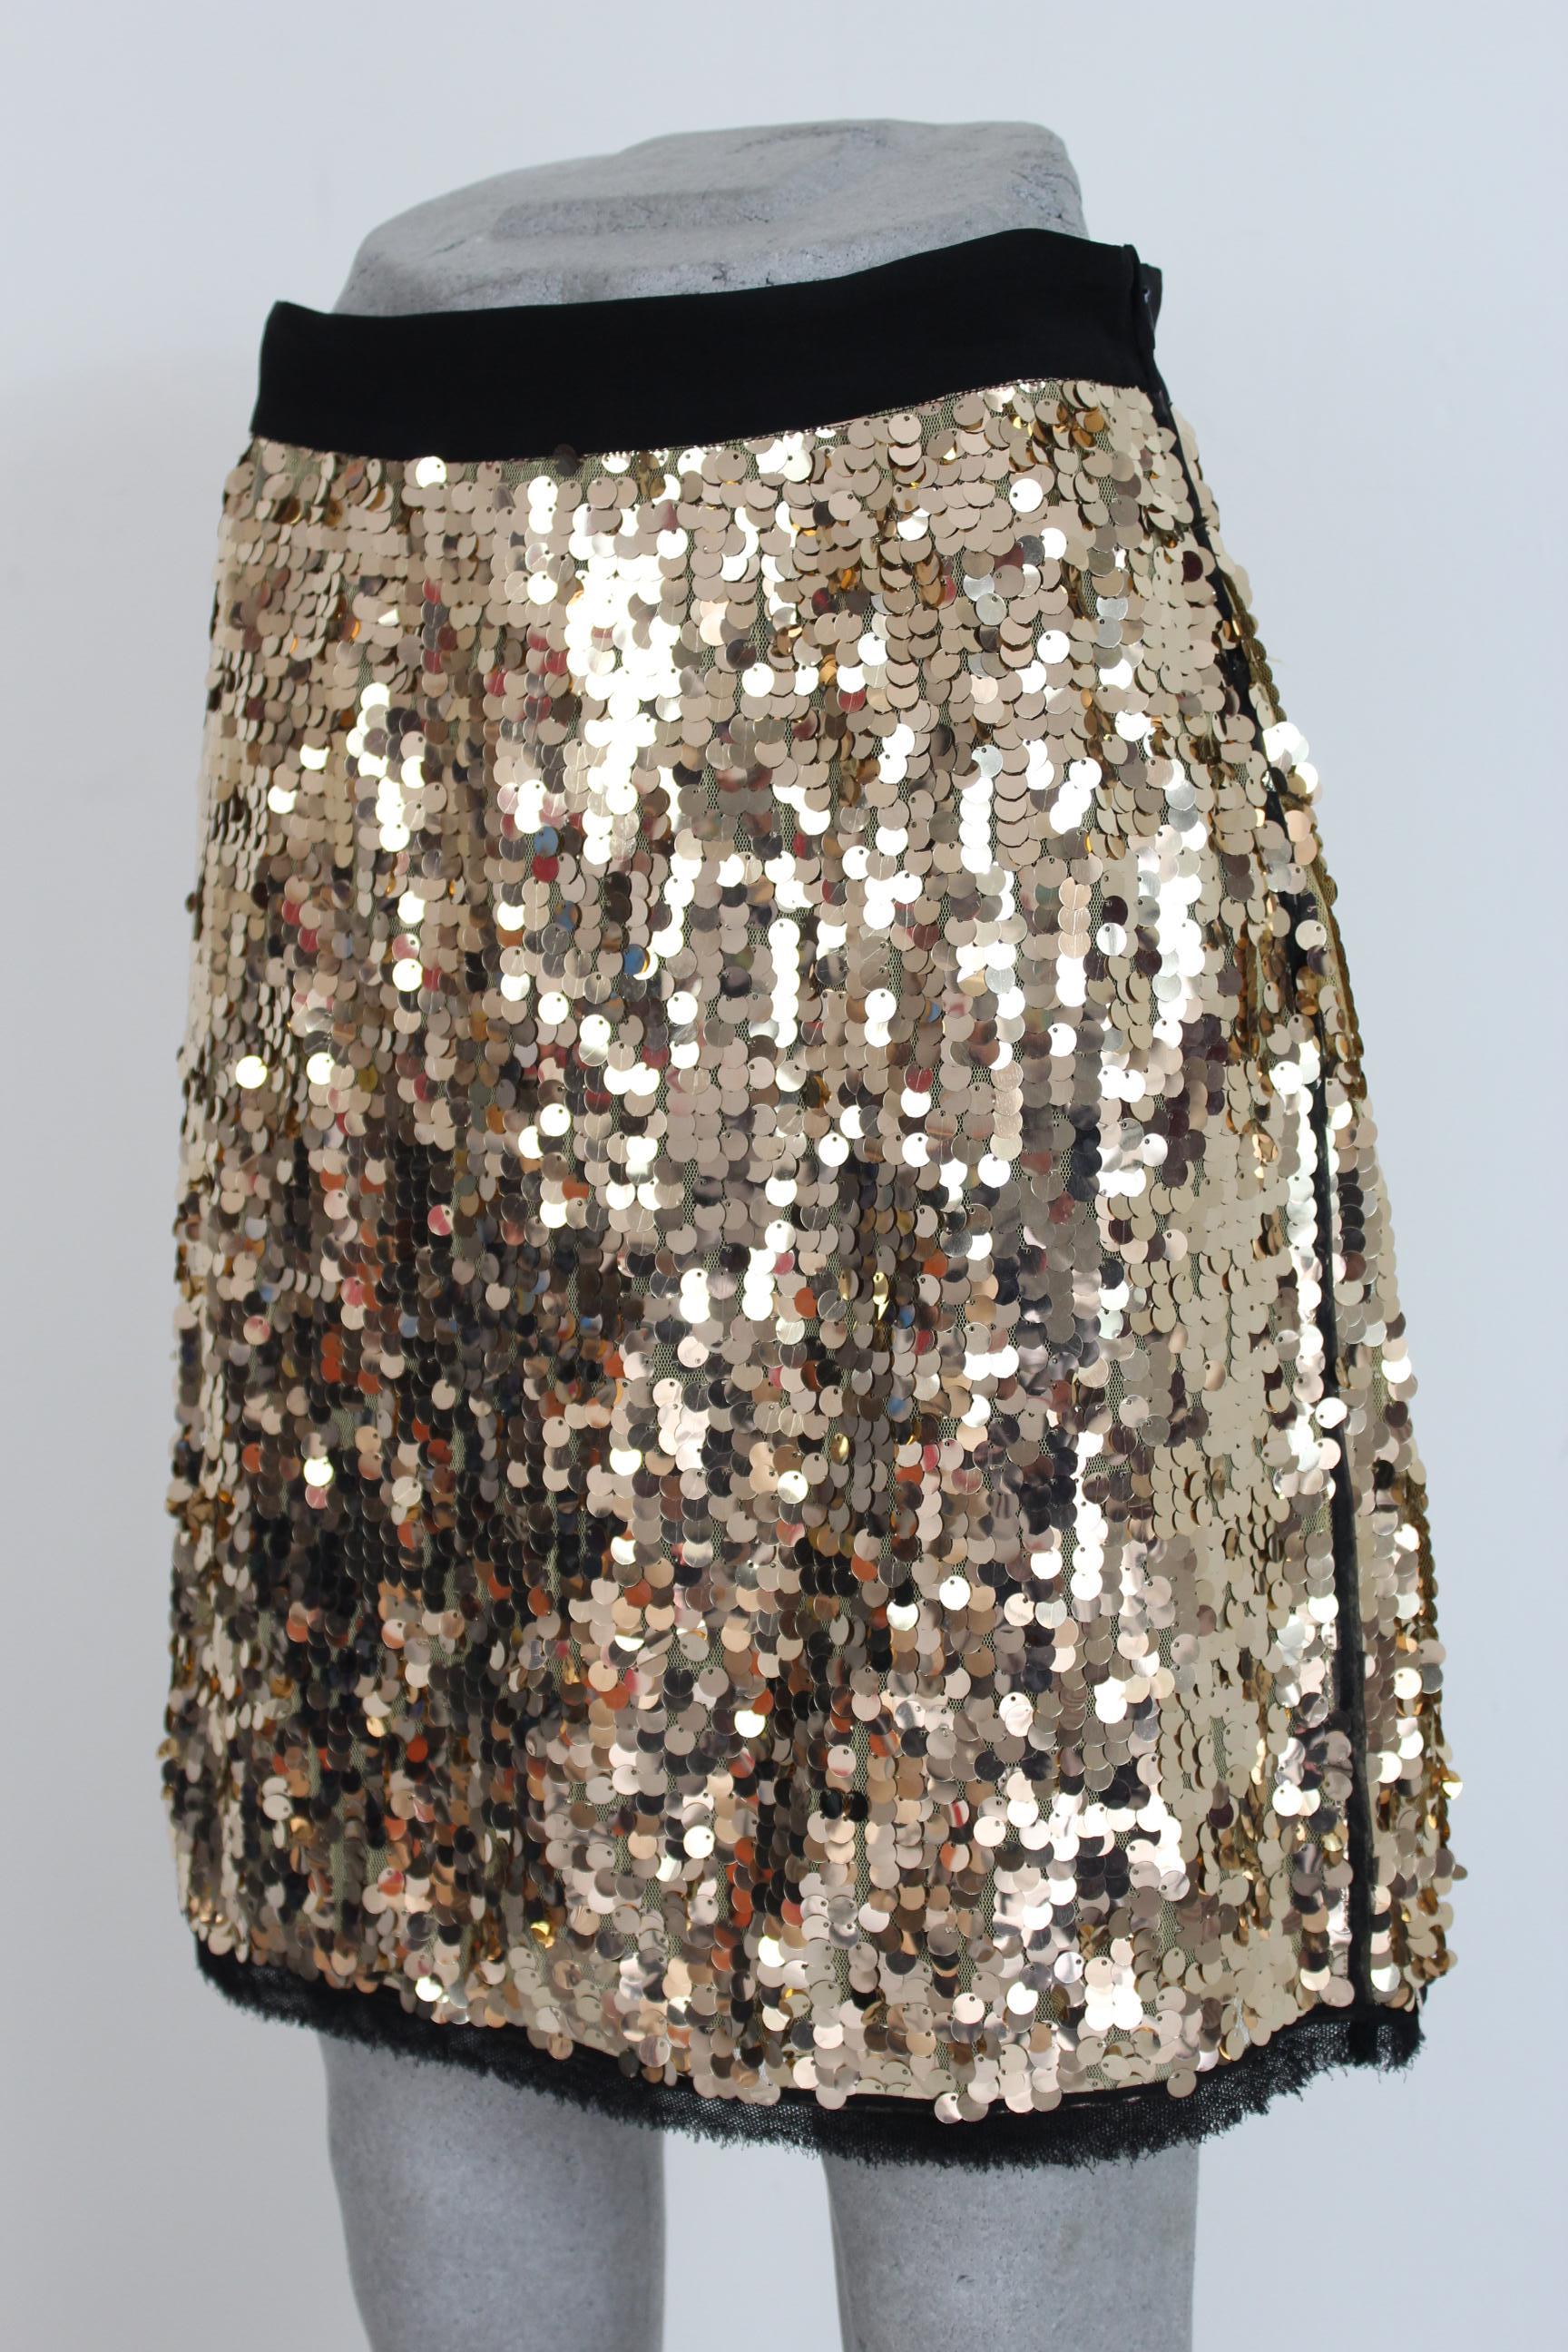 Dolce & Gabbana evening skirt 2000s. Elegant short model, gold and black with sequins, lined interior. 90% polyamide 7% silk 2% cotton 1% elastene. Made in Italy. New with tag.

Size: 42 It 8 Us 10 Uk

Waist skirt: 36 cm
Length: 52 cm